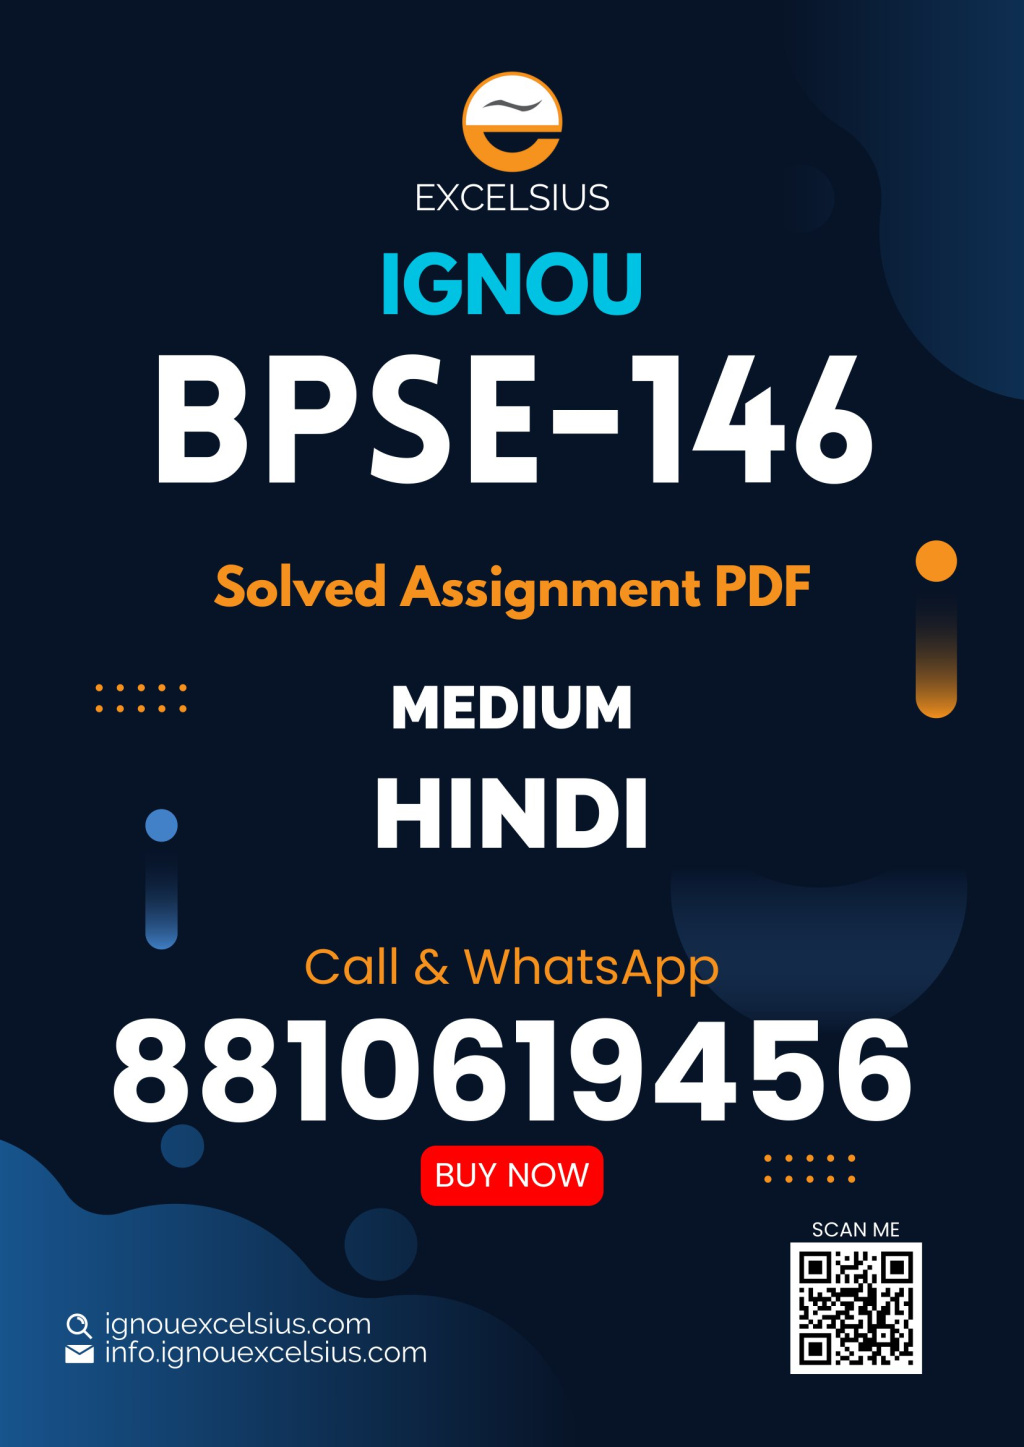 IGNOU BPSE-146 - Conflict Resolution and Peace Building, Latest Solved Assignment-July 2022 – January 2023